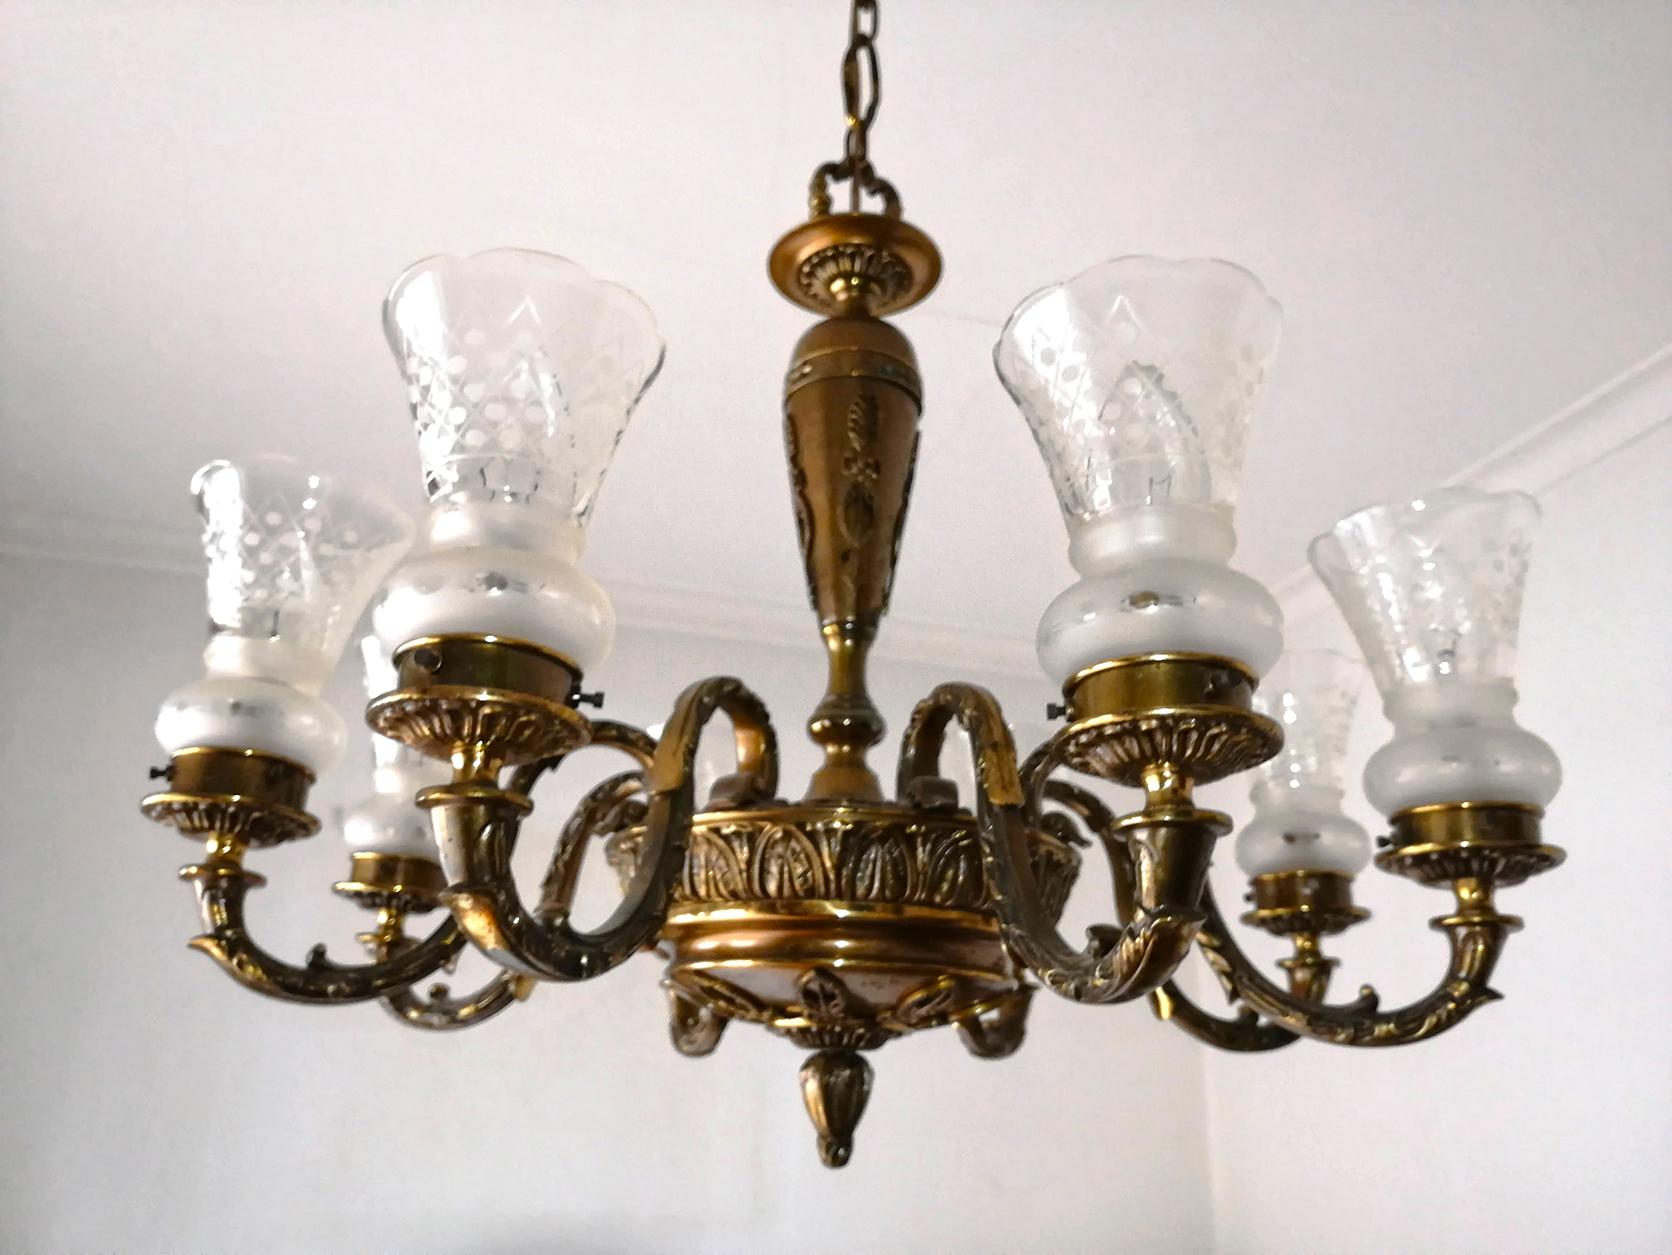 Etched Antique French Empire Neoclassical Gilt Bronze Chandelier, Early 20th Century For Sale